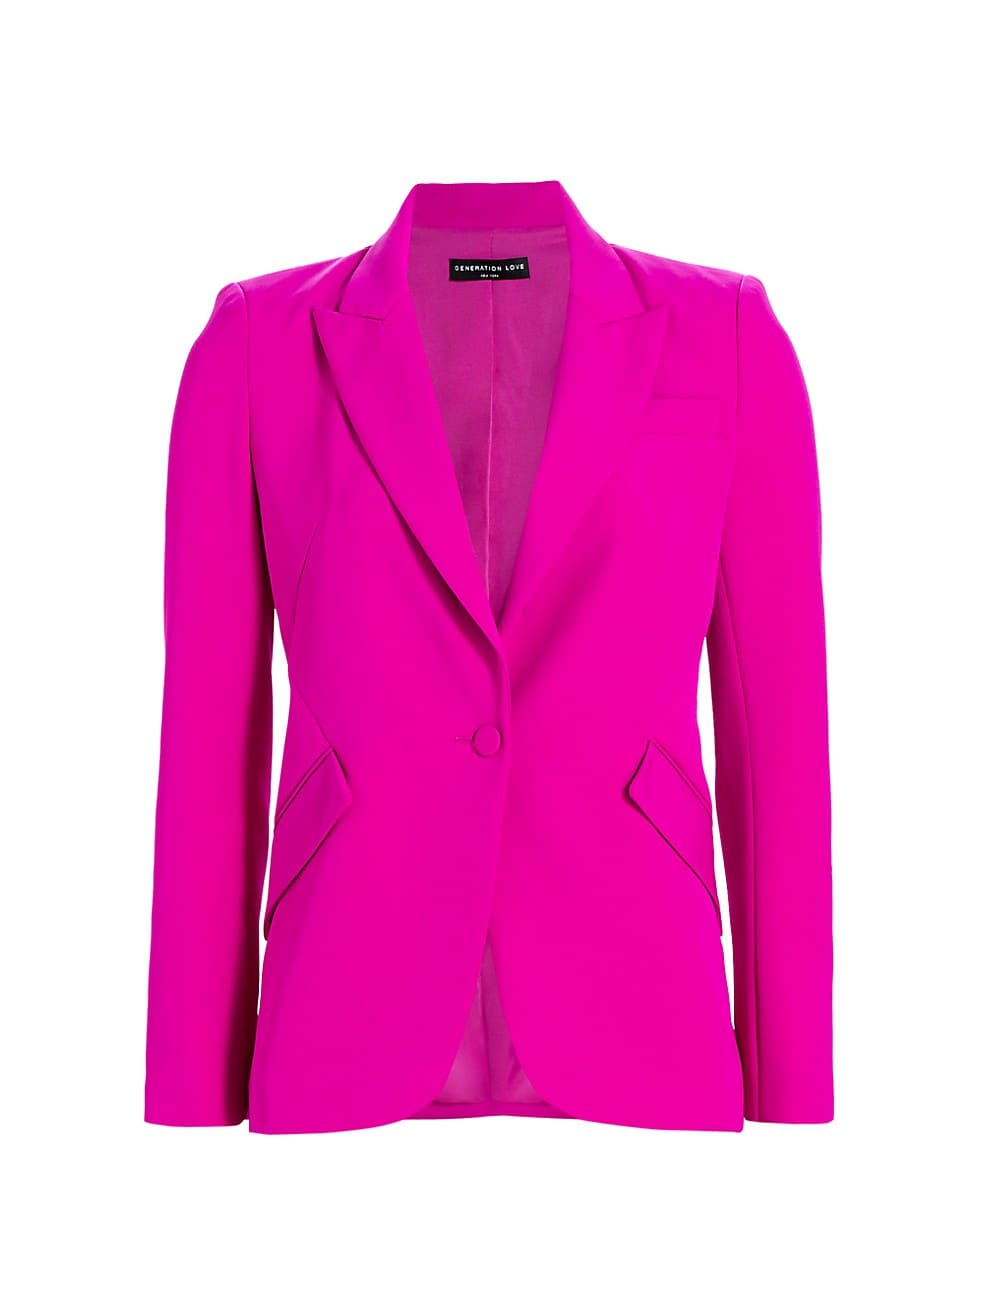 The Best Early Fall Pieces By Generation Love single button crepe blazer bright blazer for fall how to wear hot pink in fall can I wear hot pink year round personal stylists share their favorite blazers